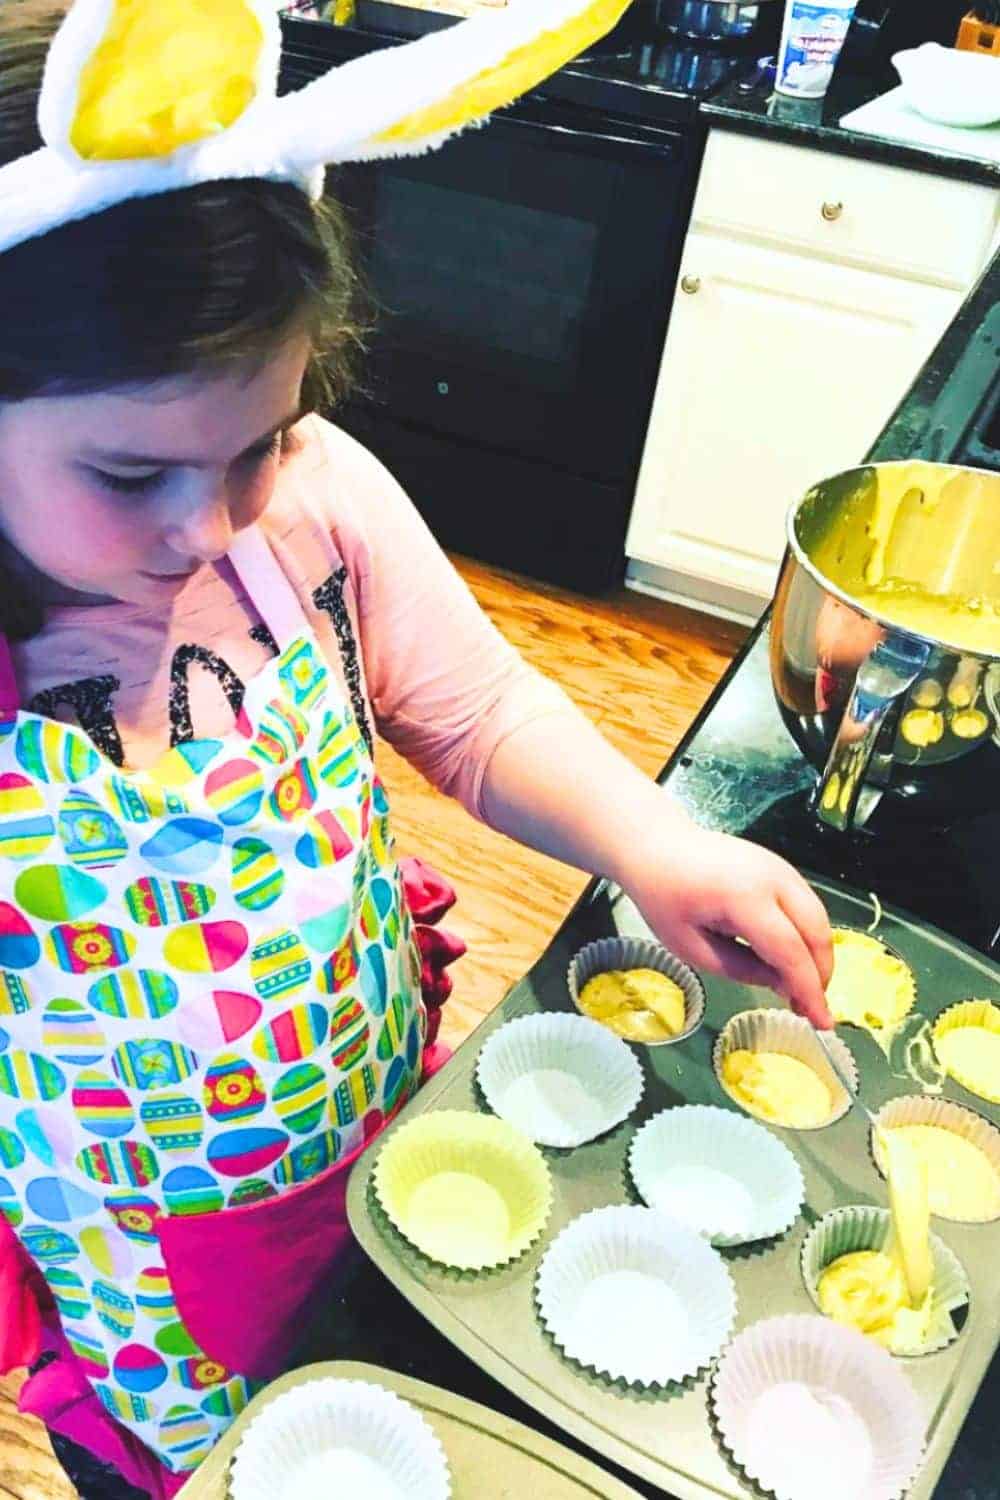 How To Make Yellow Chickens Cupcakes Step By Step With Printable Recipe Card child making spooning cake batter mix into cupcake holders